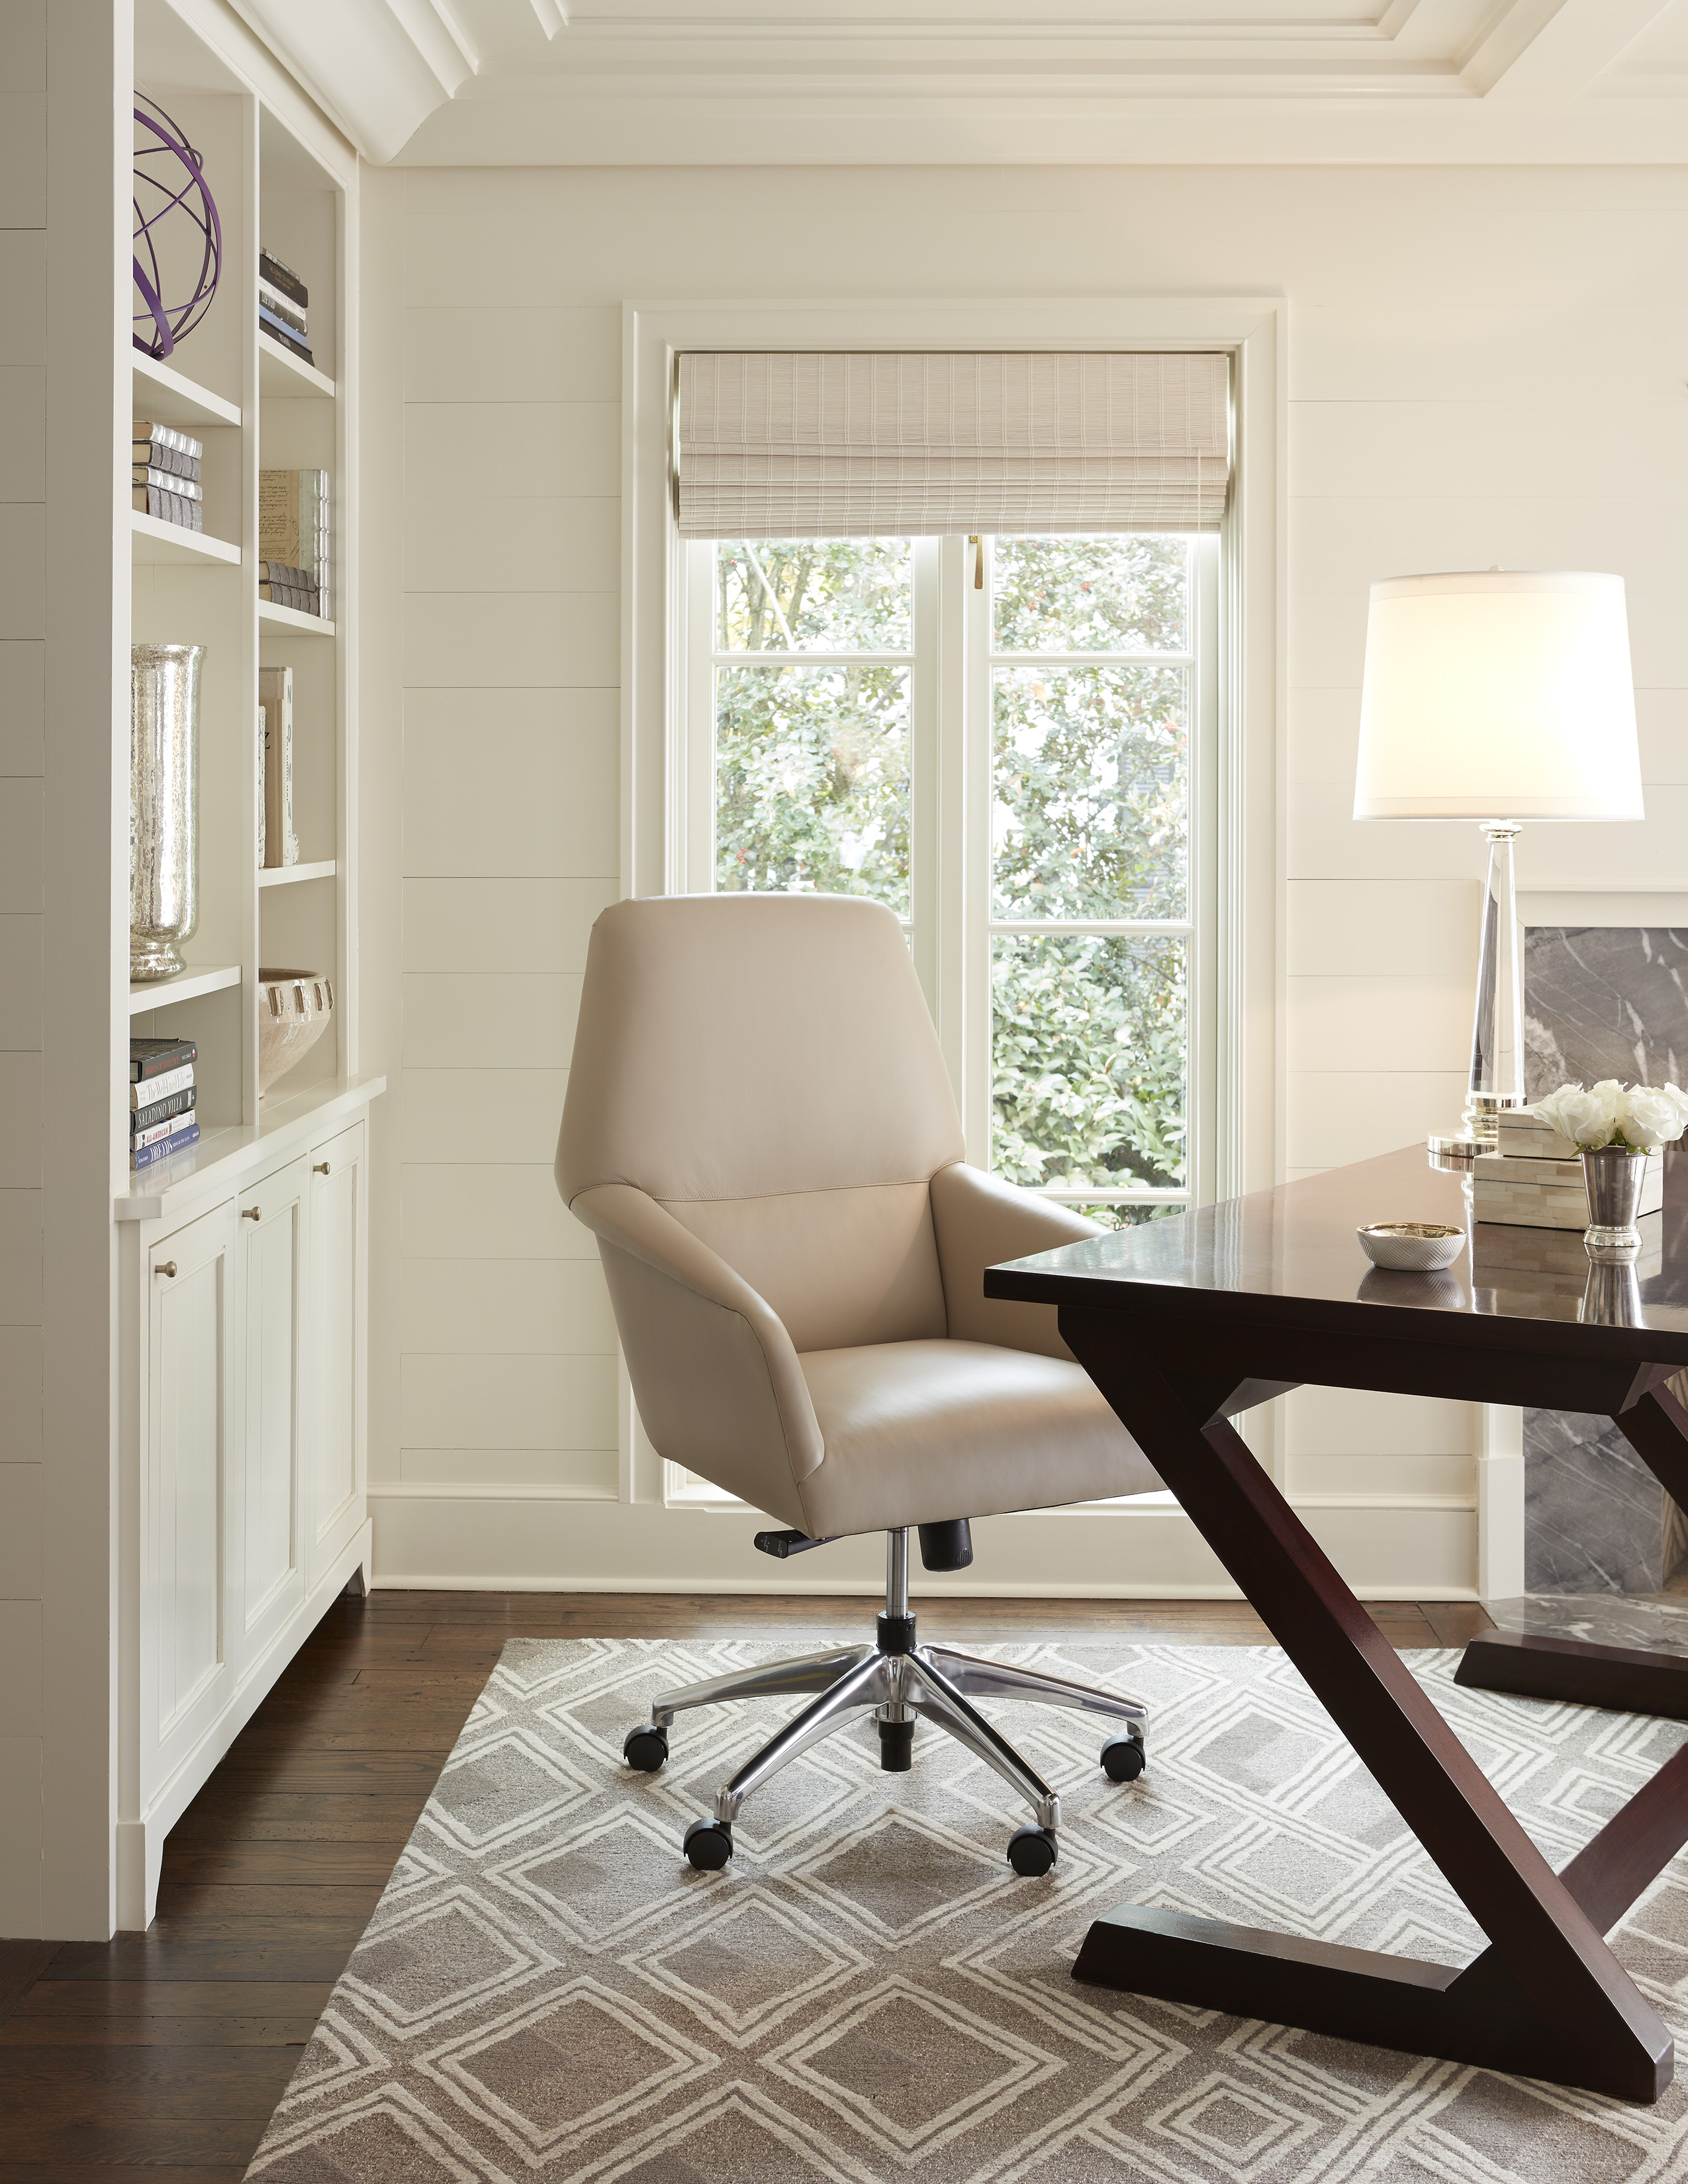 WORKING FROM HOME HOW TO DESIGN THE PERFECT HOME OFFICE